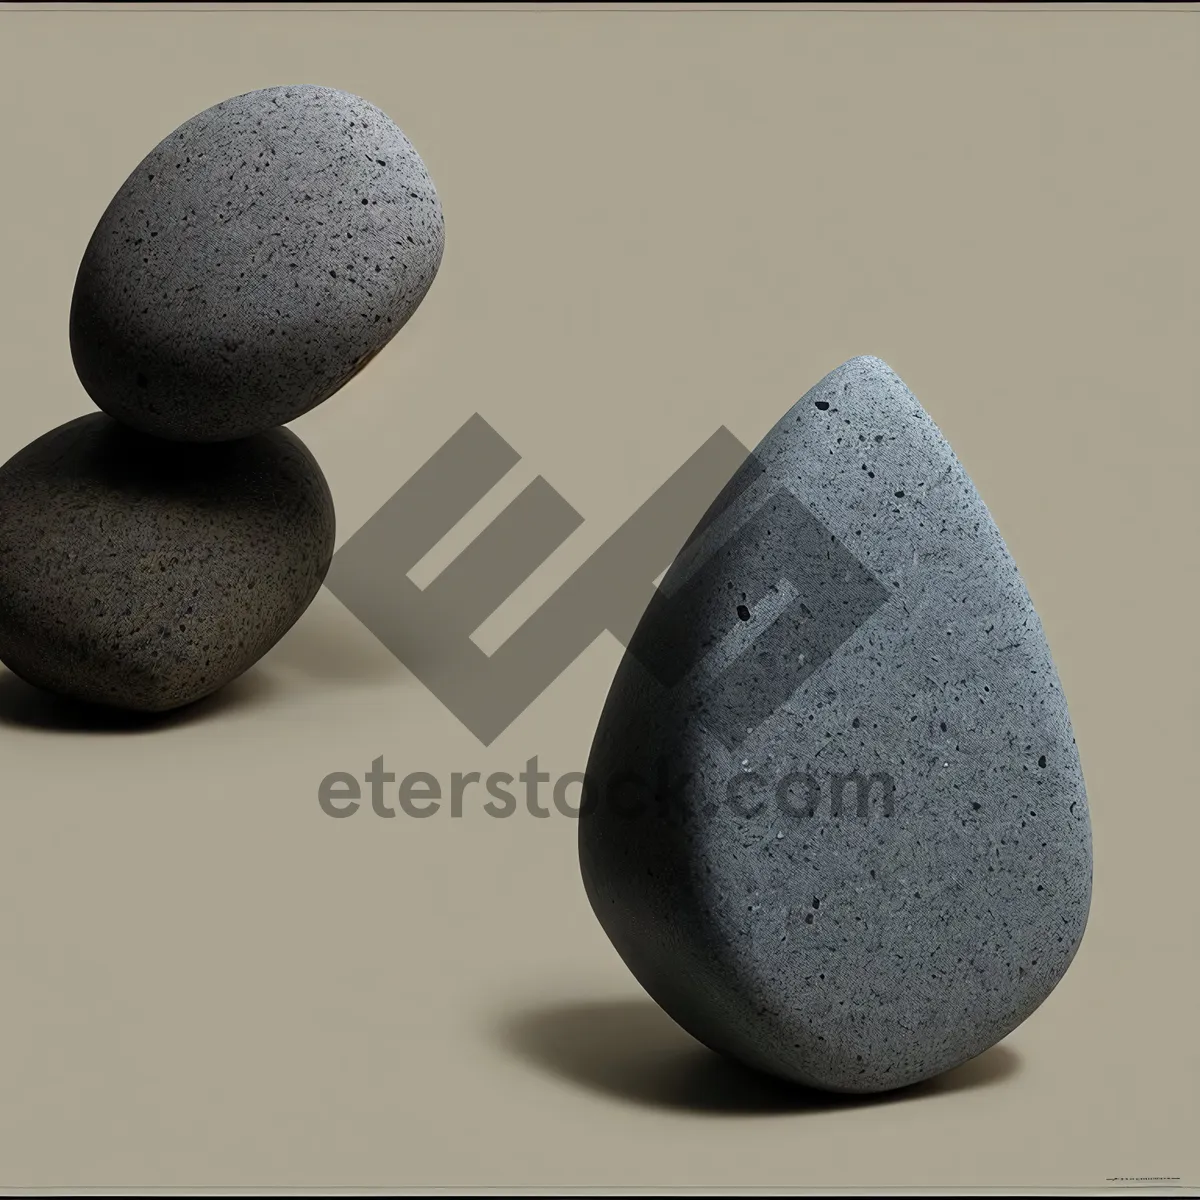 Picture of Tranquil Fruit Harmony: Avocado and Pebble Stack